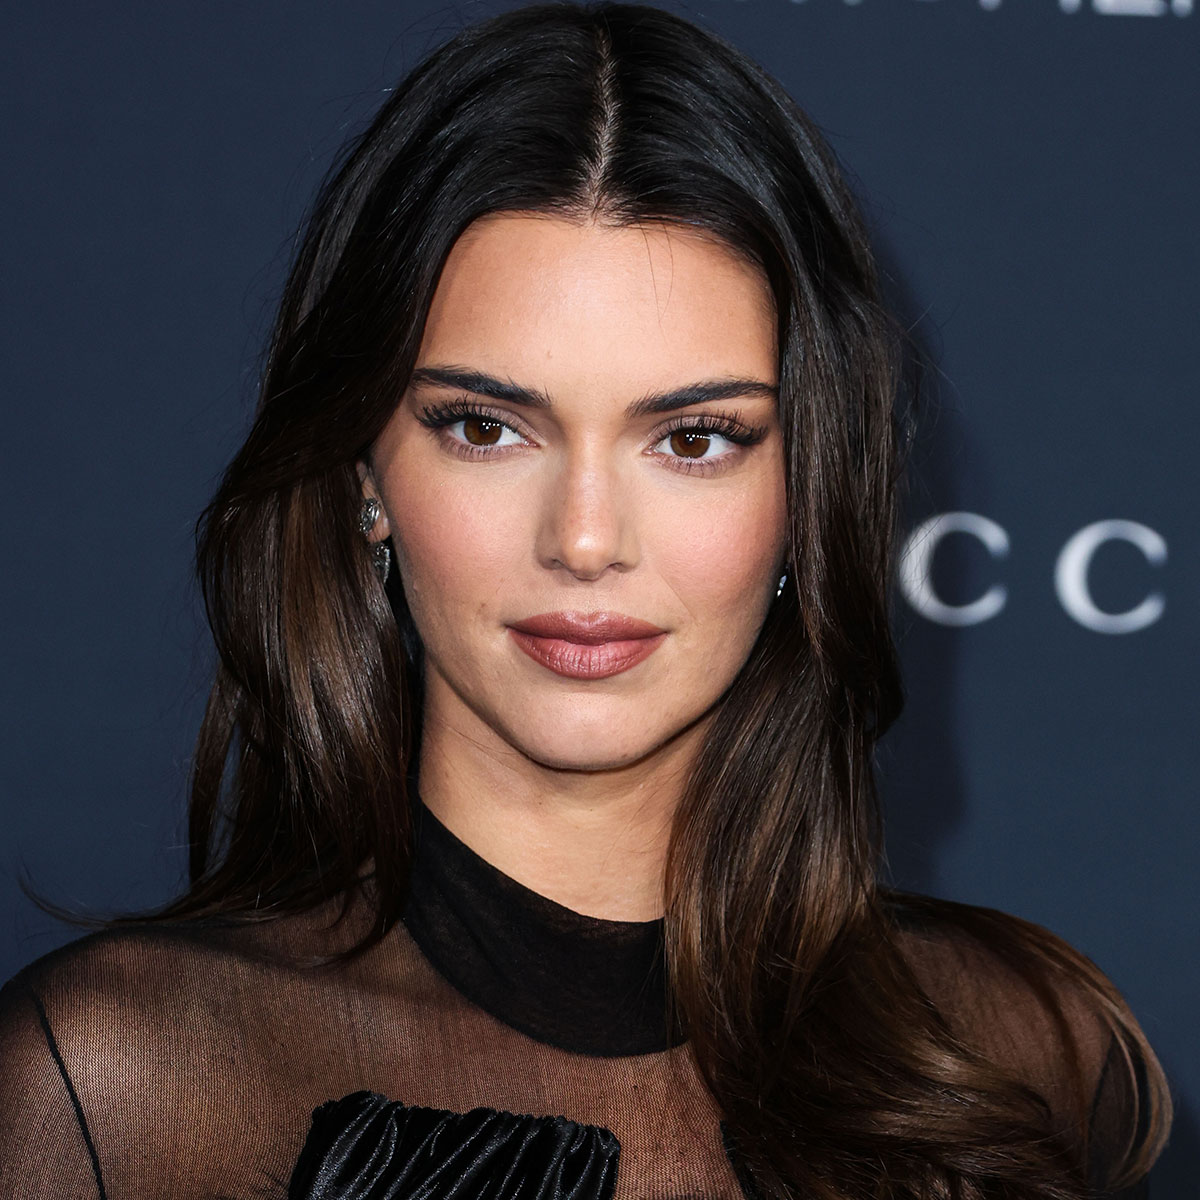 Kendall Jenner Breaks Instagram In A Strapless Leather Dress From